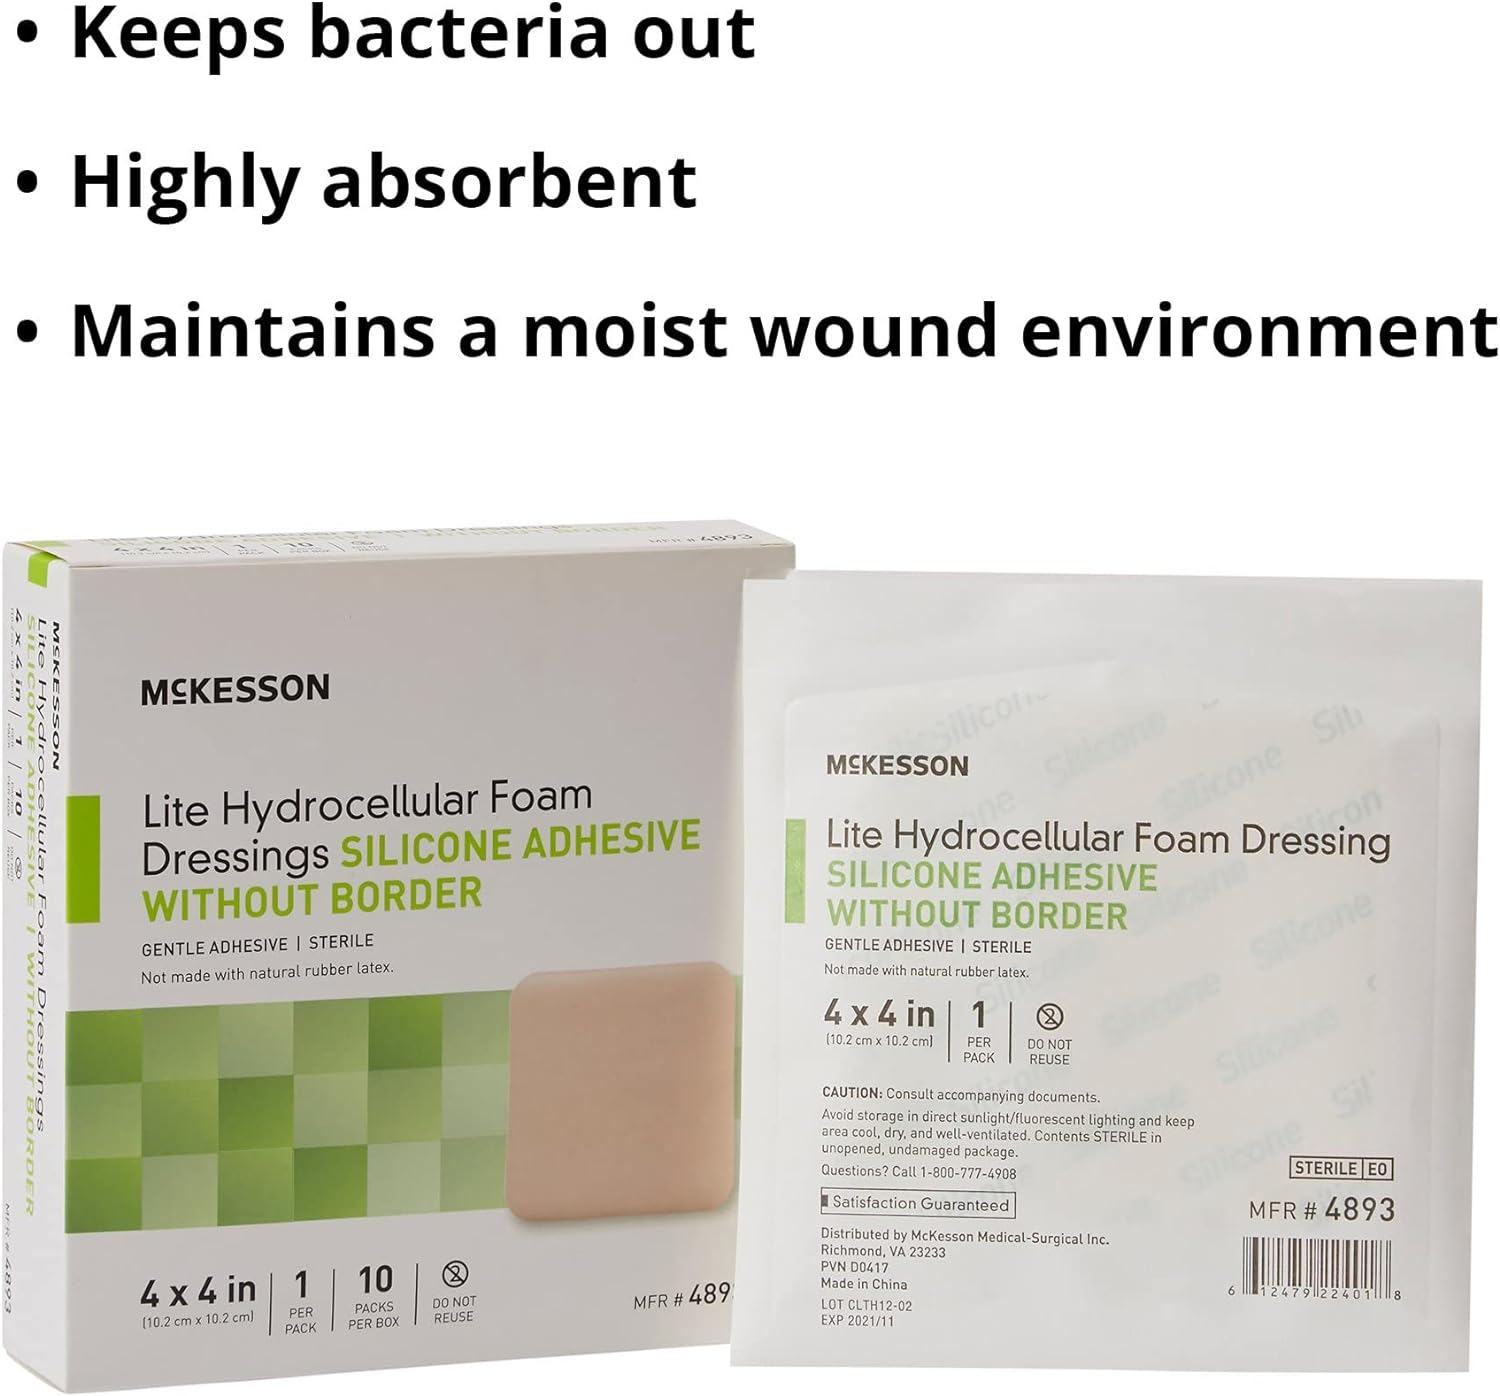 McKesson Lite Hydrocellular Foam Dressings, Sterile, Silicone Adhesive Without Border, 4 in x 4 in, 10 Count, 1 Pack